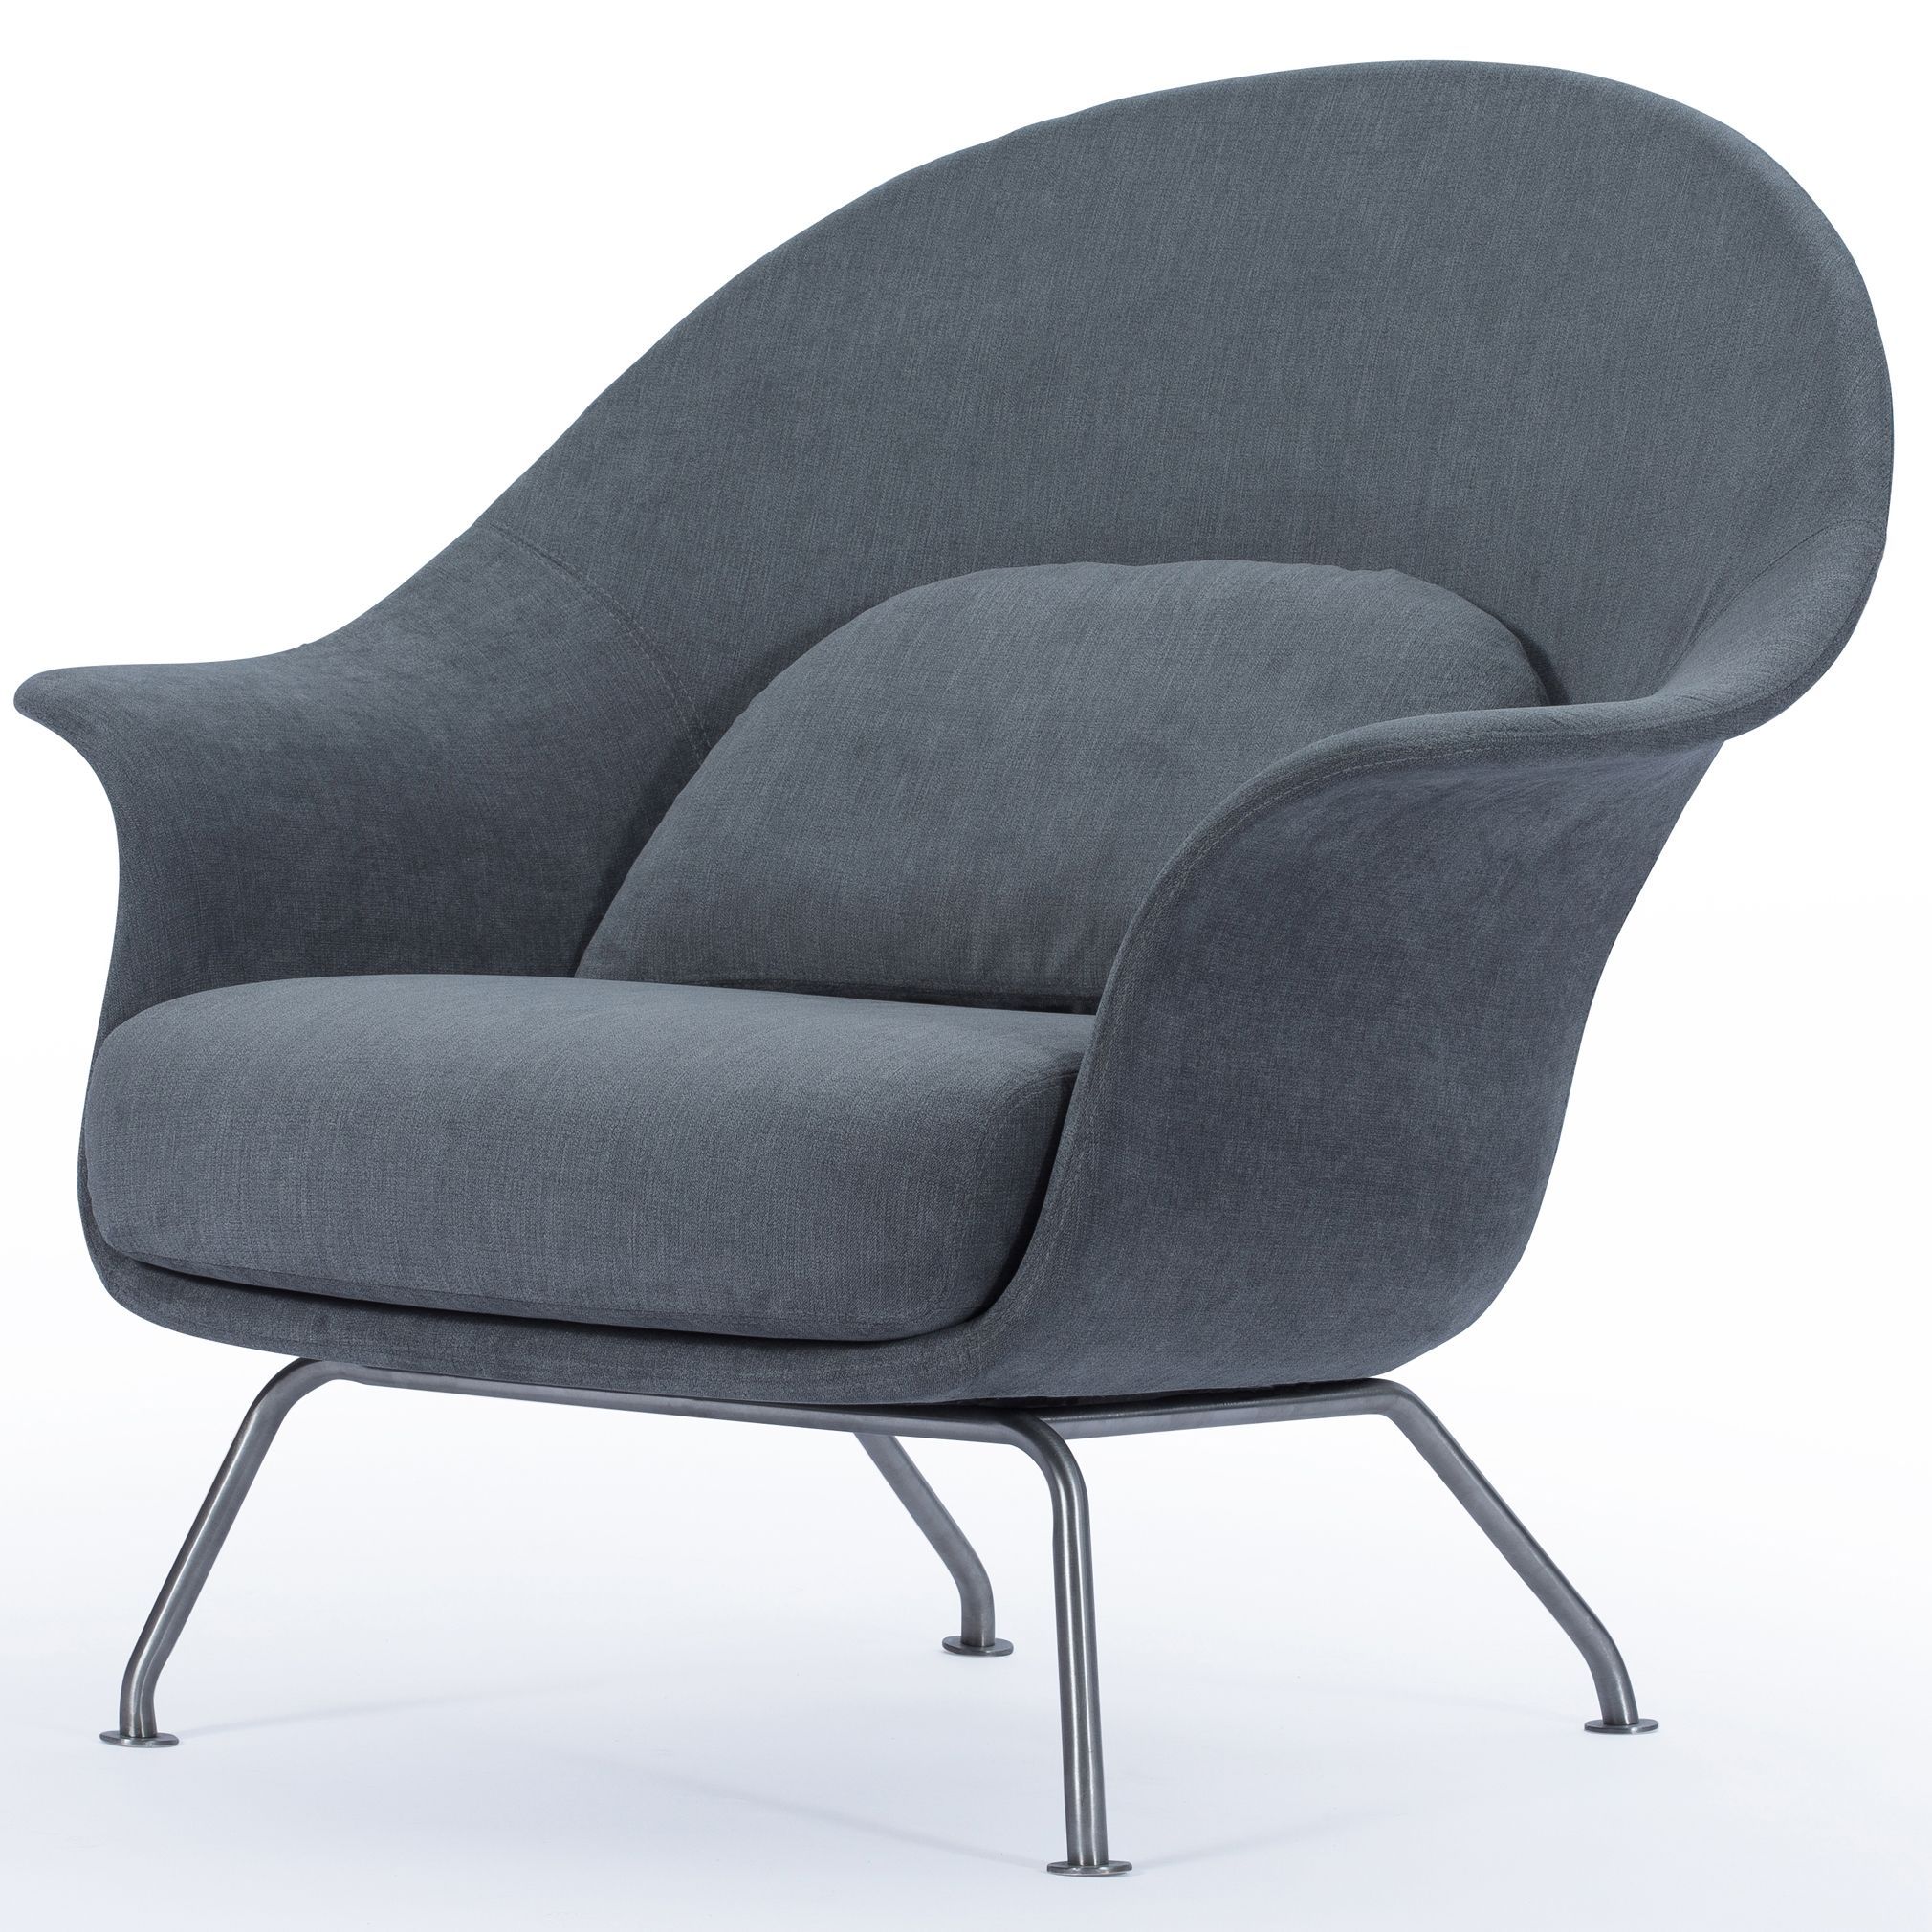 Chiara Kd Fabric Accent Chair Brushed Stainless Steel Legs, Moonbeam In Loft Black Swivel Accent Chairs (View 7 of 20)